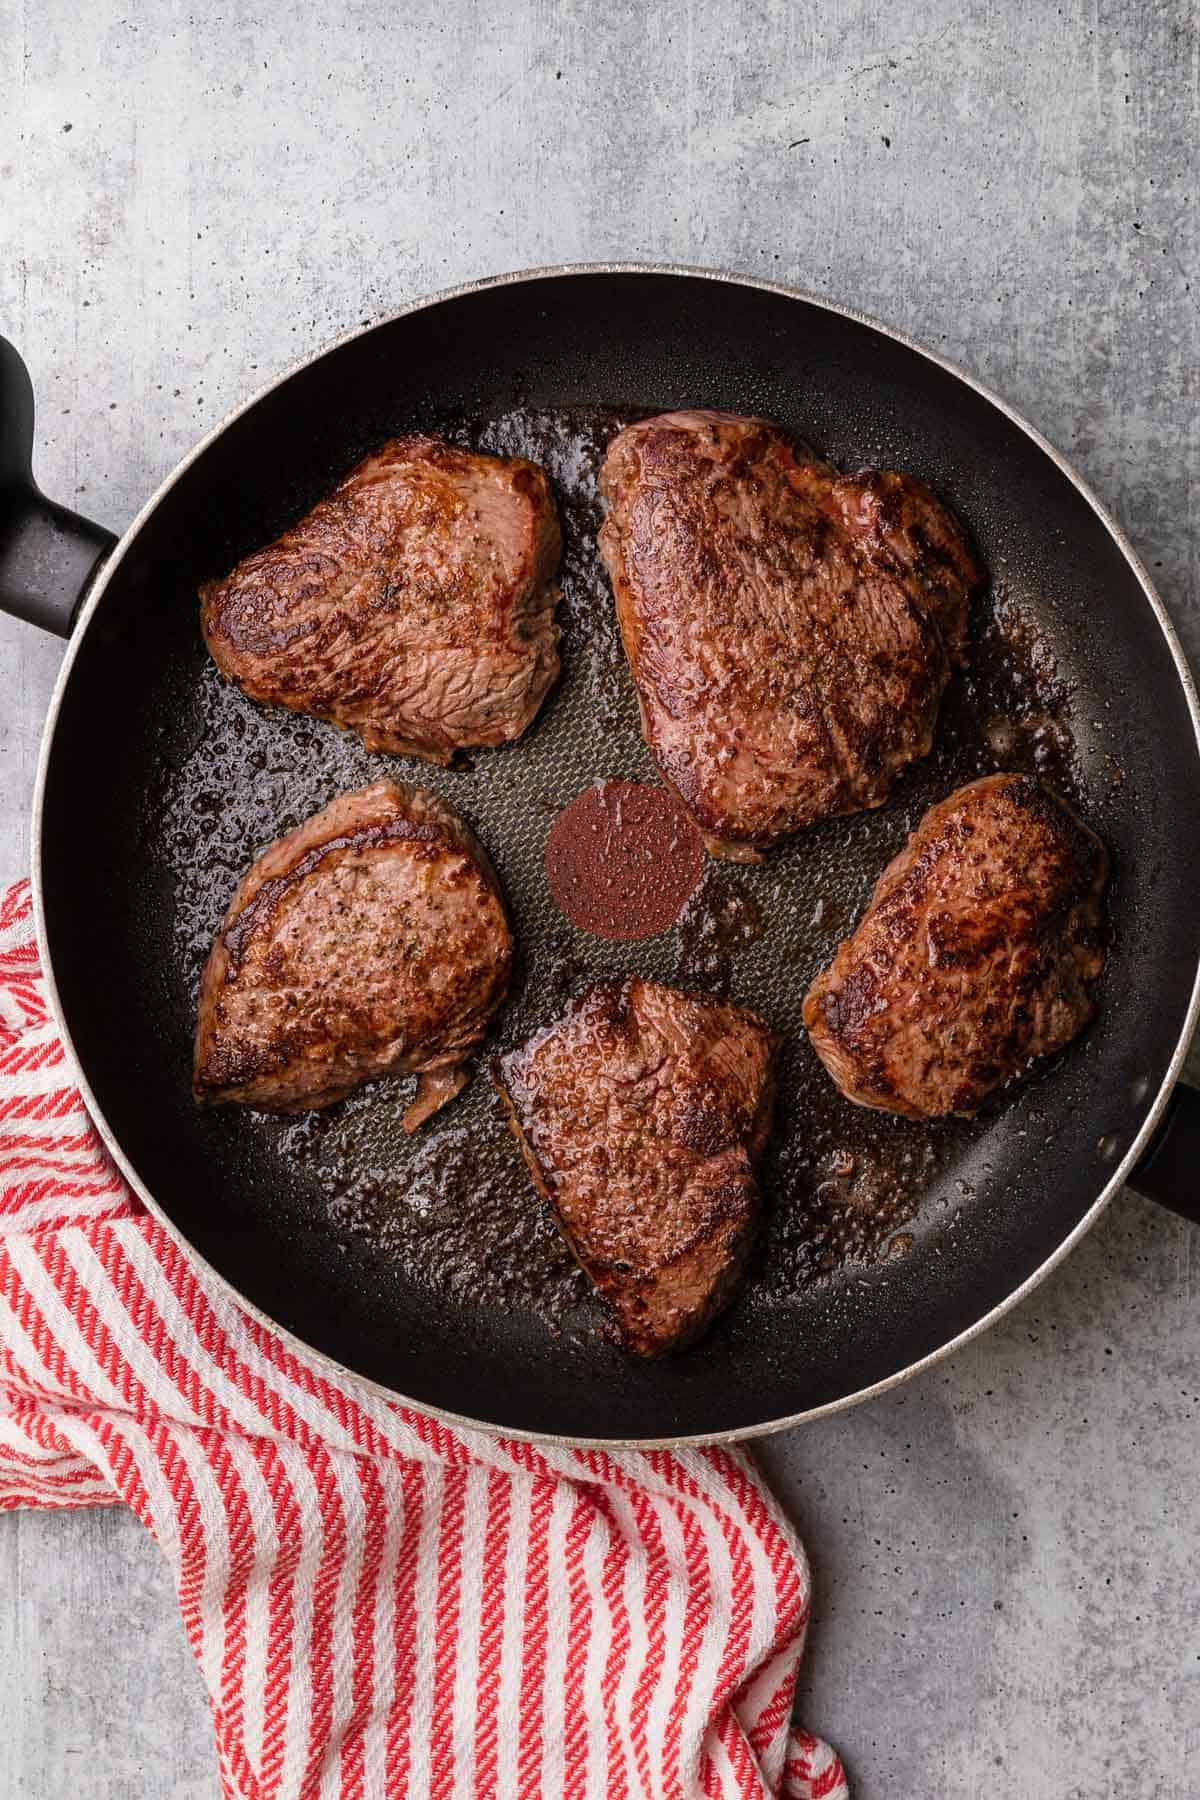 skillet with cooking steaks